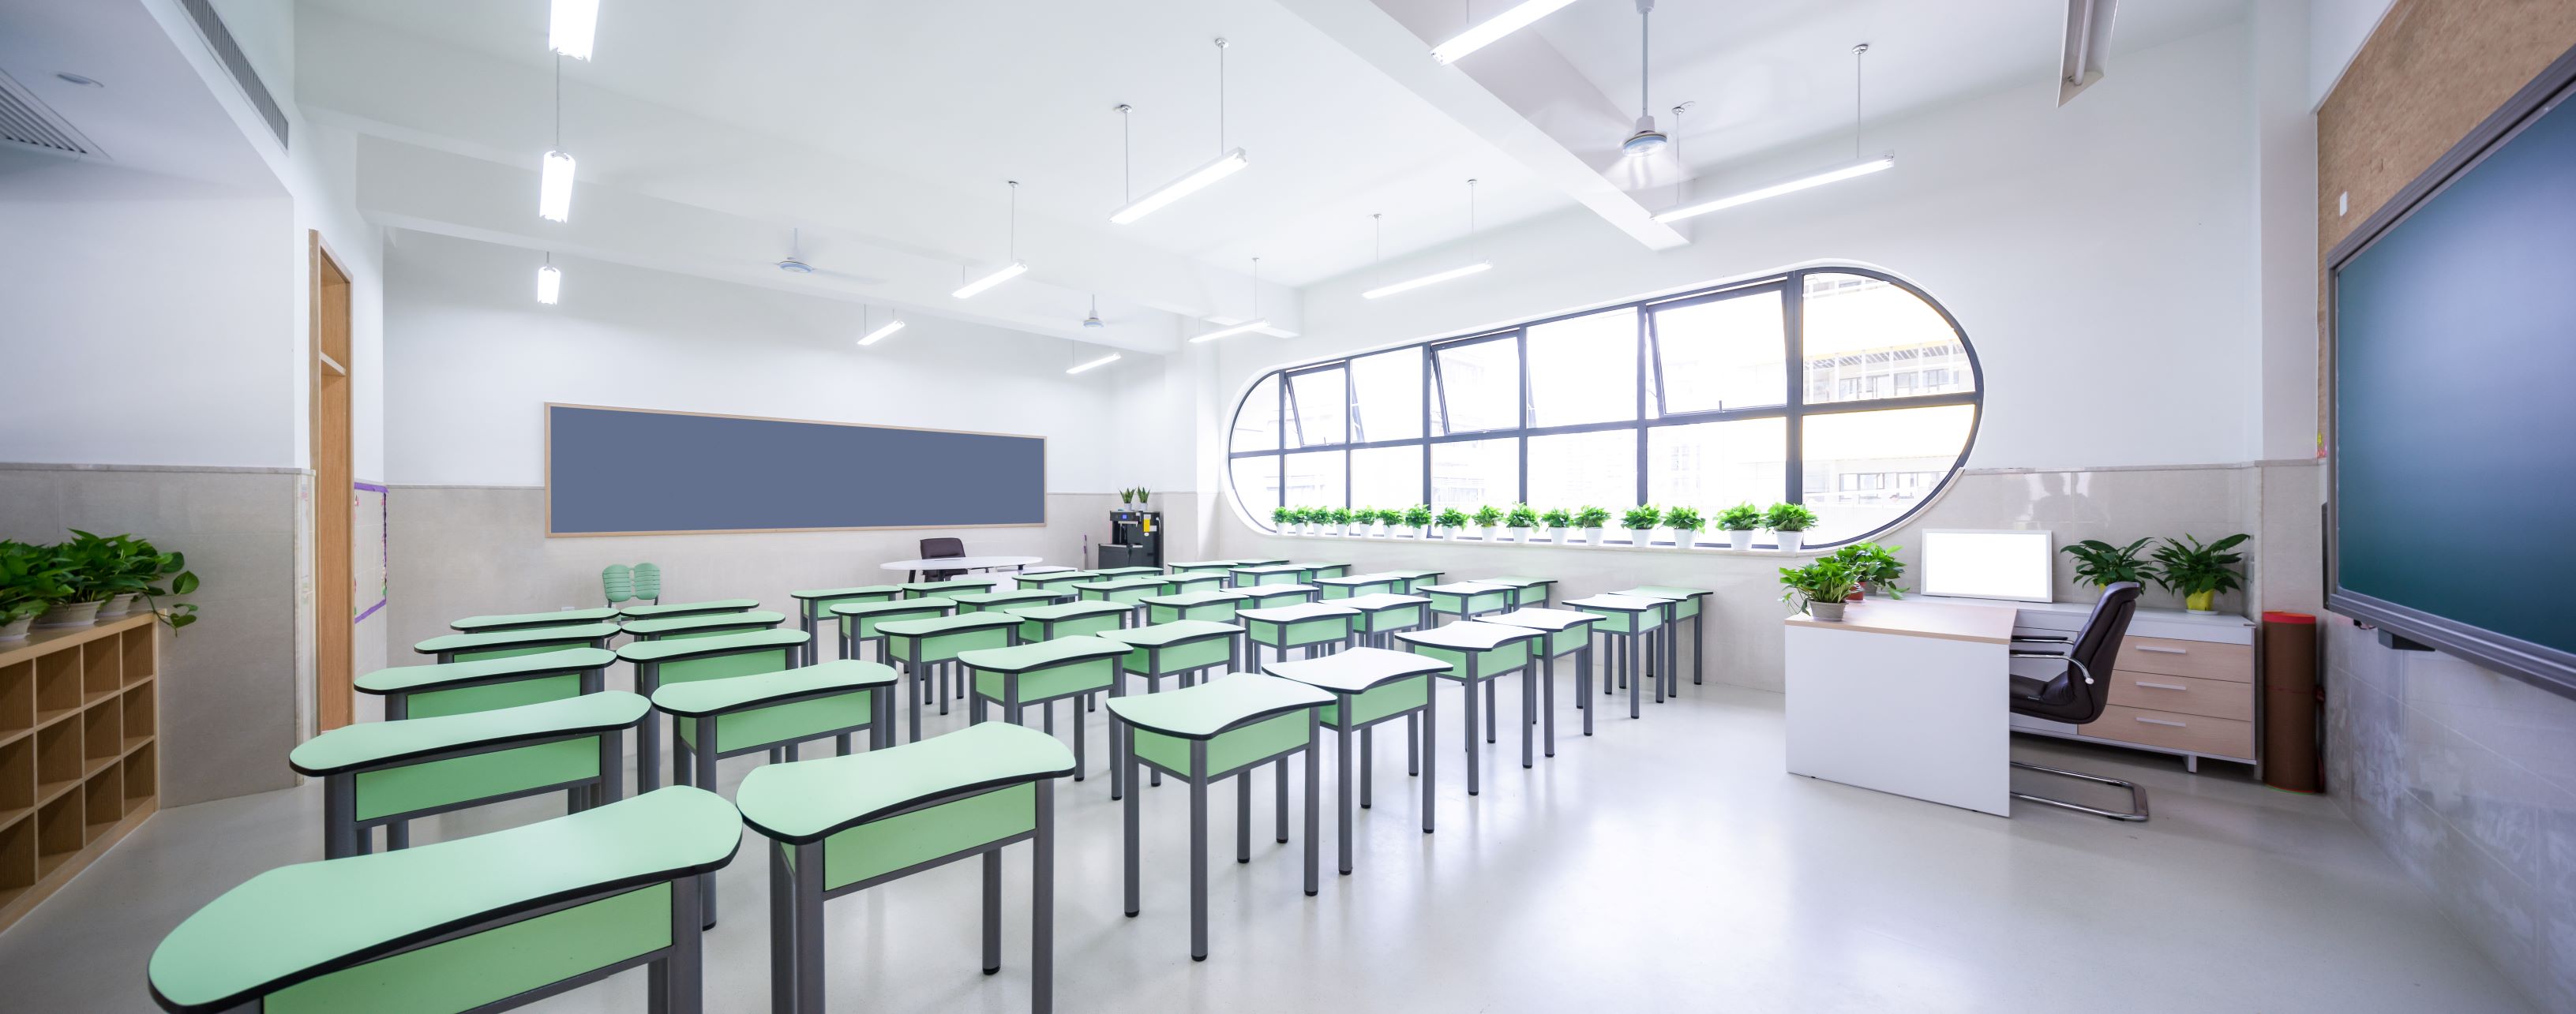 Interior of a large brightly lit classrooms with air flow